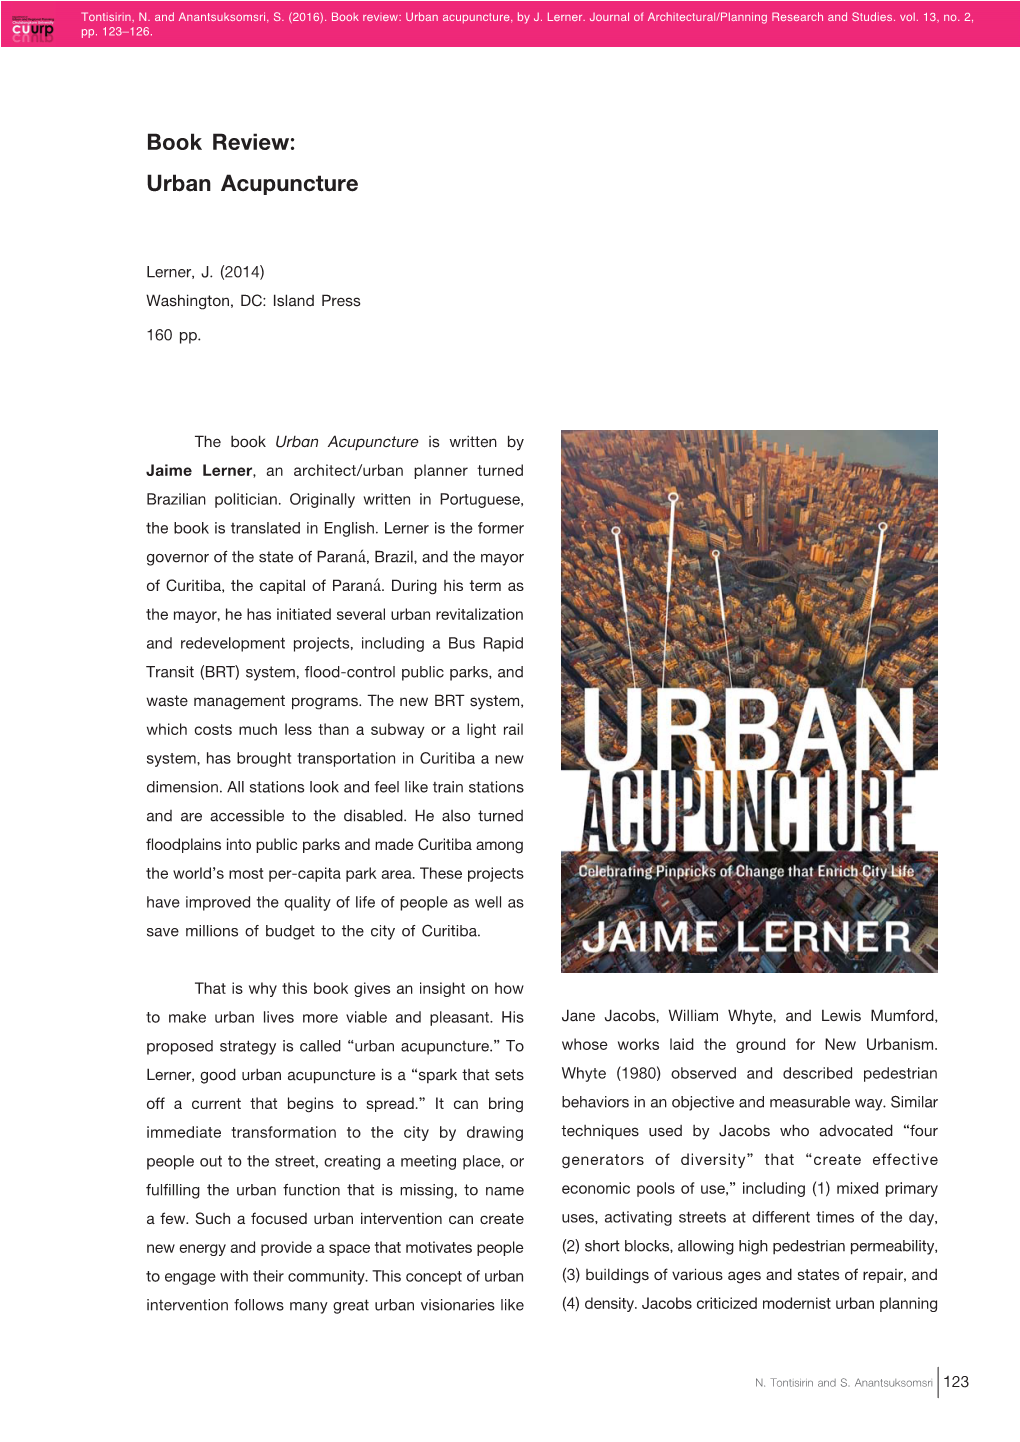 Book Review: Urban Acupuncture, by J